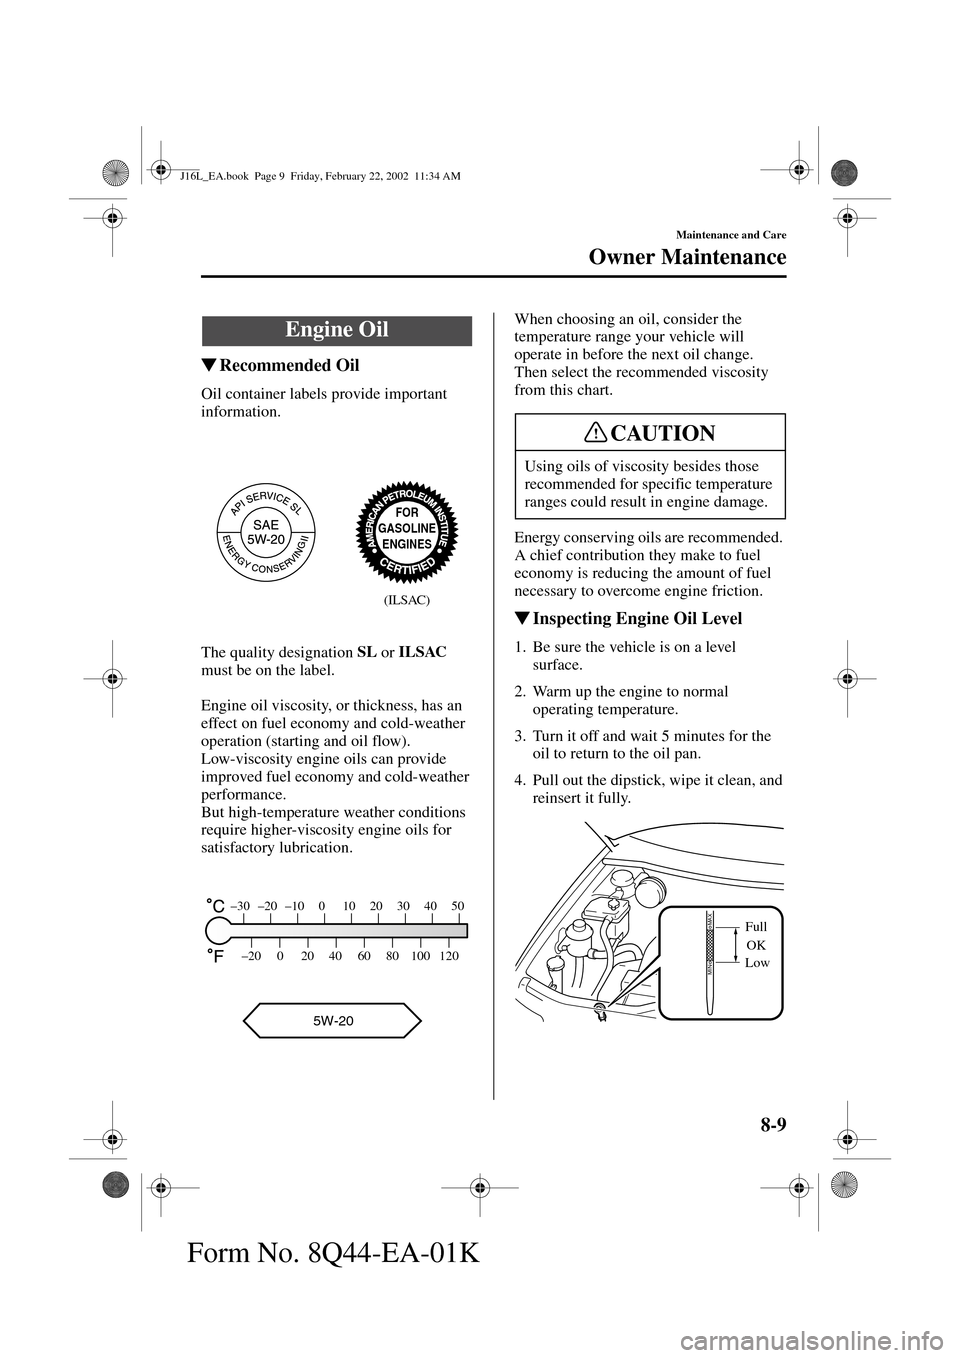 MAZDA MODEL MPV 2002  Owners Manual (in English) 8-9
Maintenance and Care
Owner Maintenance
Form No. 8Q44-EA-01K
Recommended Oil
Oil container labels provide important 
information.
The quality designation SL
 or ILSAC
 
must be on the label.
Engin